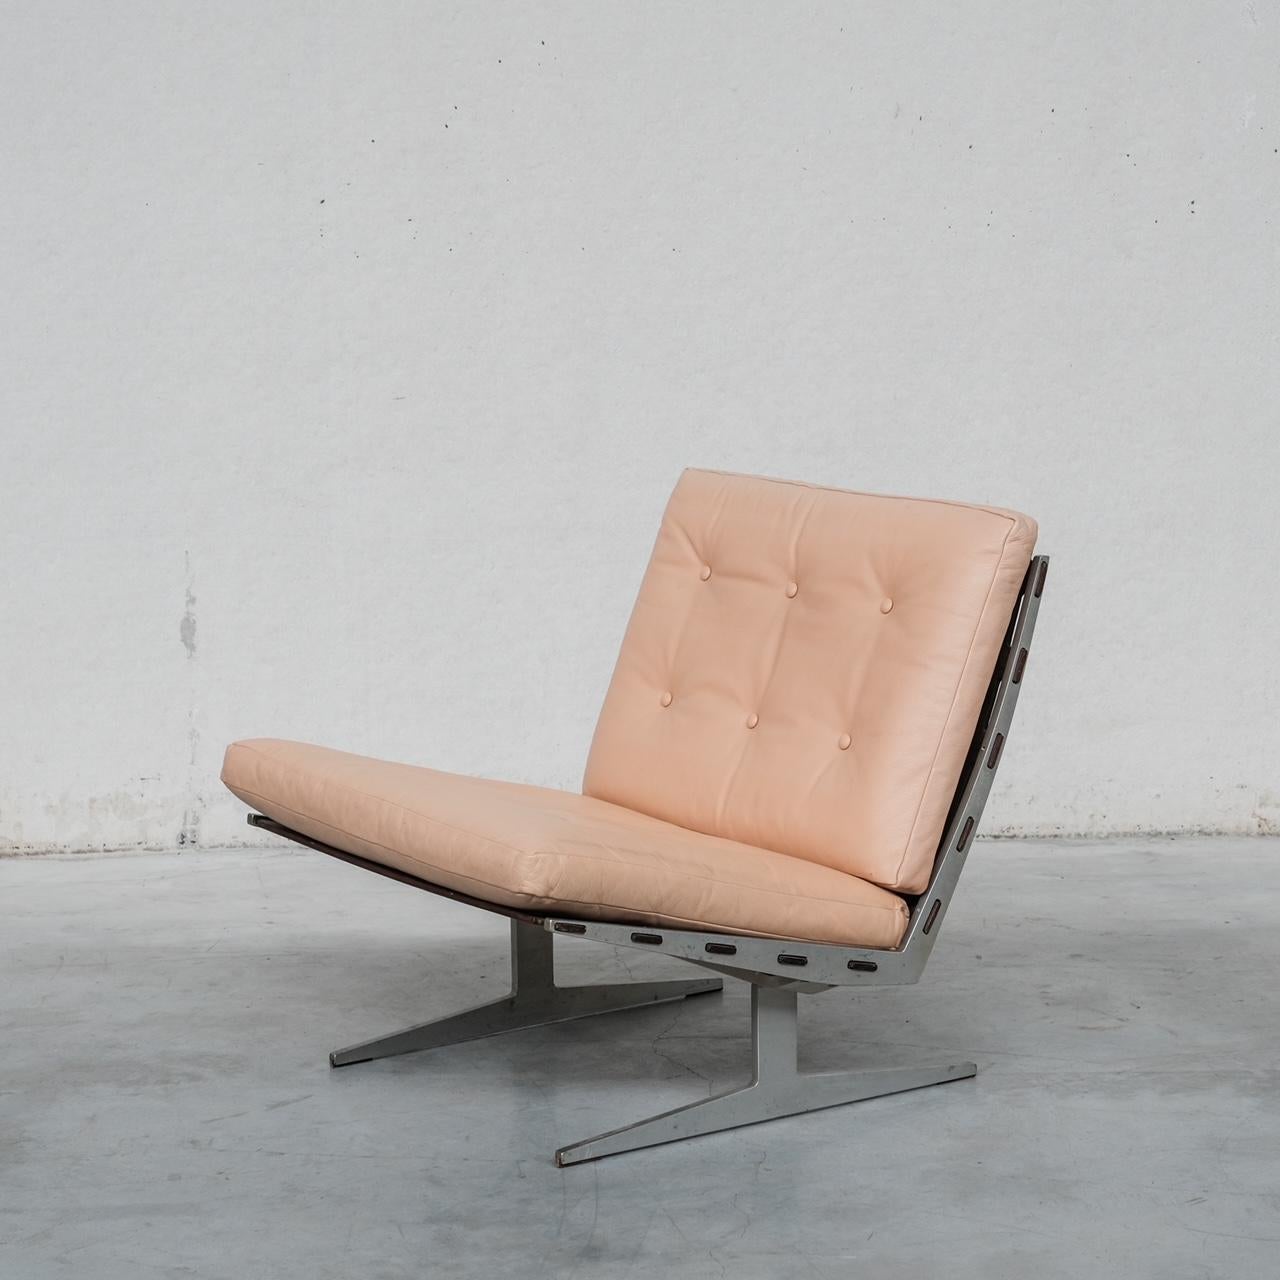 A rare lounge chair by Paul Leidersdorff. 

Denmark, c1960s. 

Caravelle model. 

Leather, steel and wood. 

Good vintage condition. 

PRICES ARE EXCLUSIVE OF VAT IF SOLD IN THE UK. 

Internal Ref: 07/03/24/016.

Location: Belgium